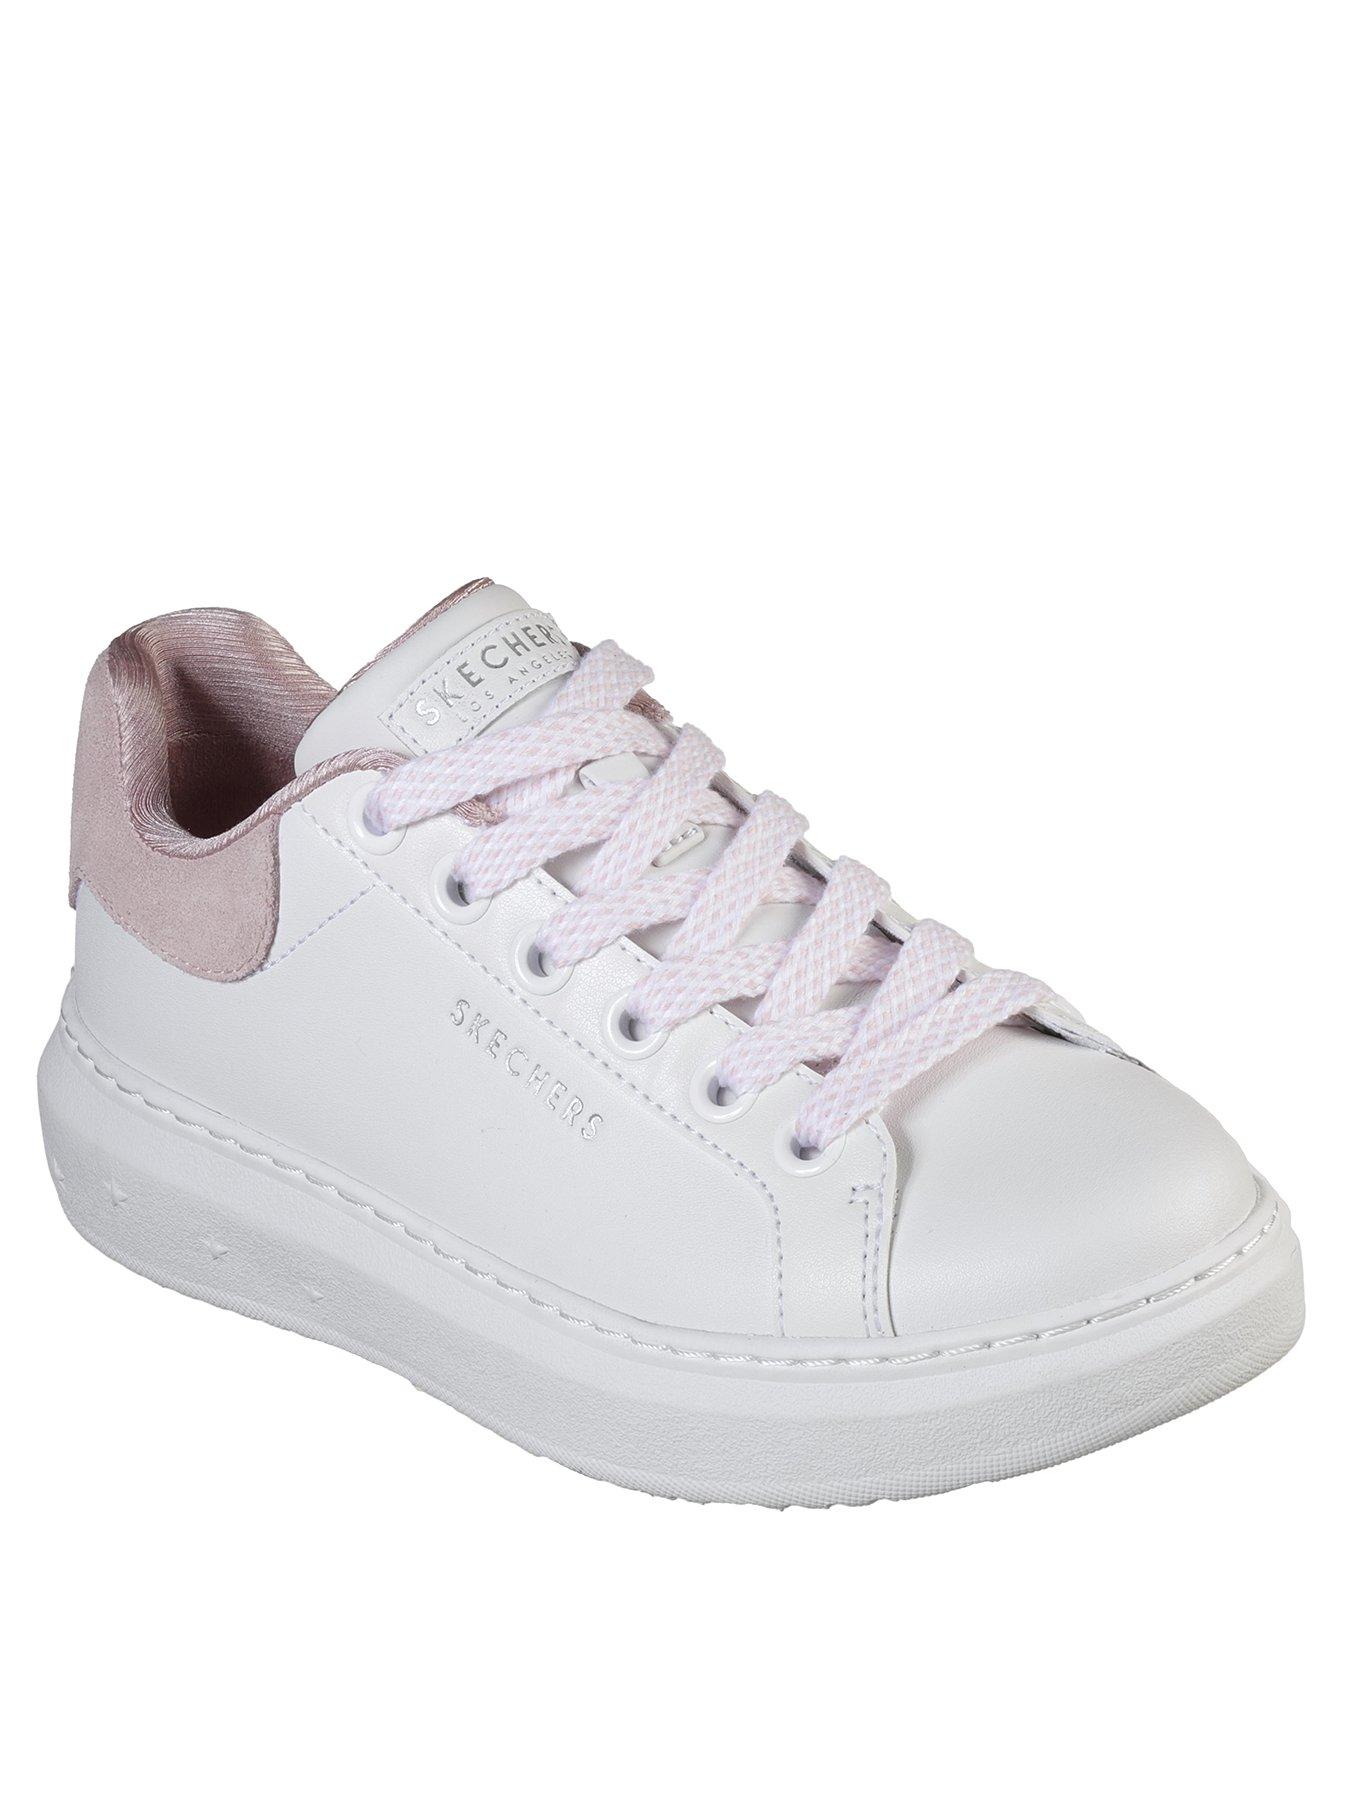 skechers high street lace up trainers